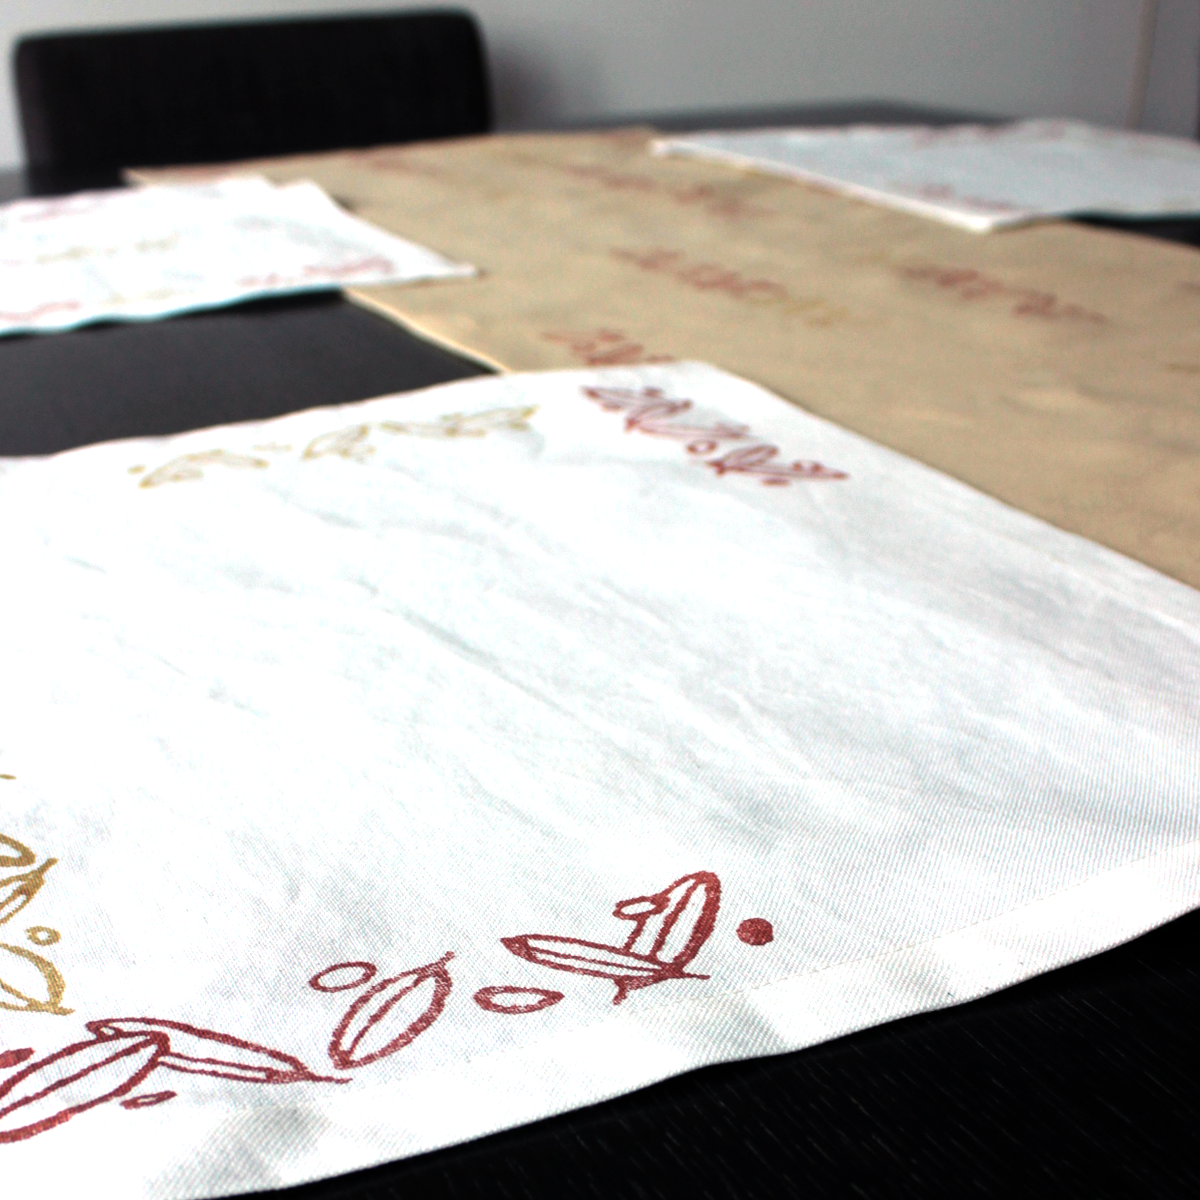 Mediterranean-Inspired Olive Block Print Linen Placemats and Runner